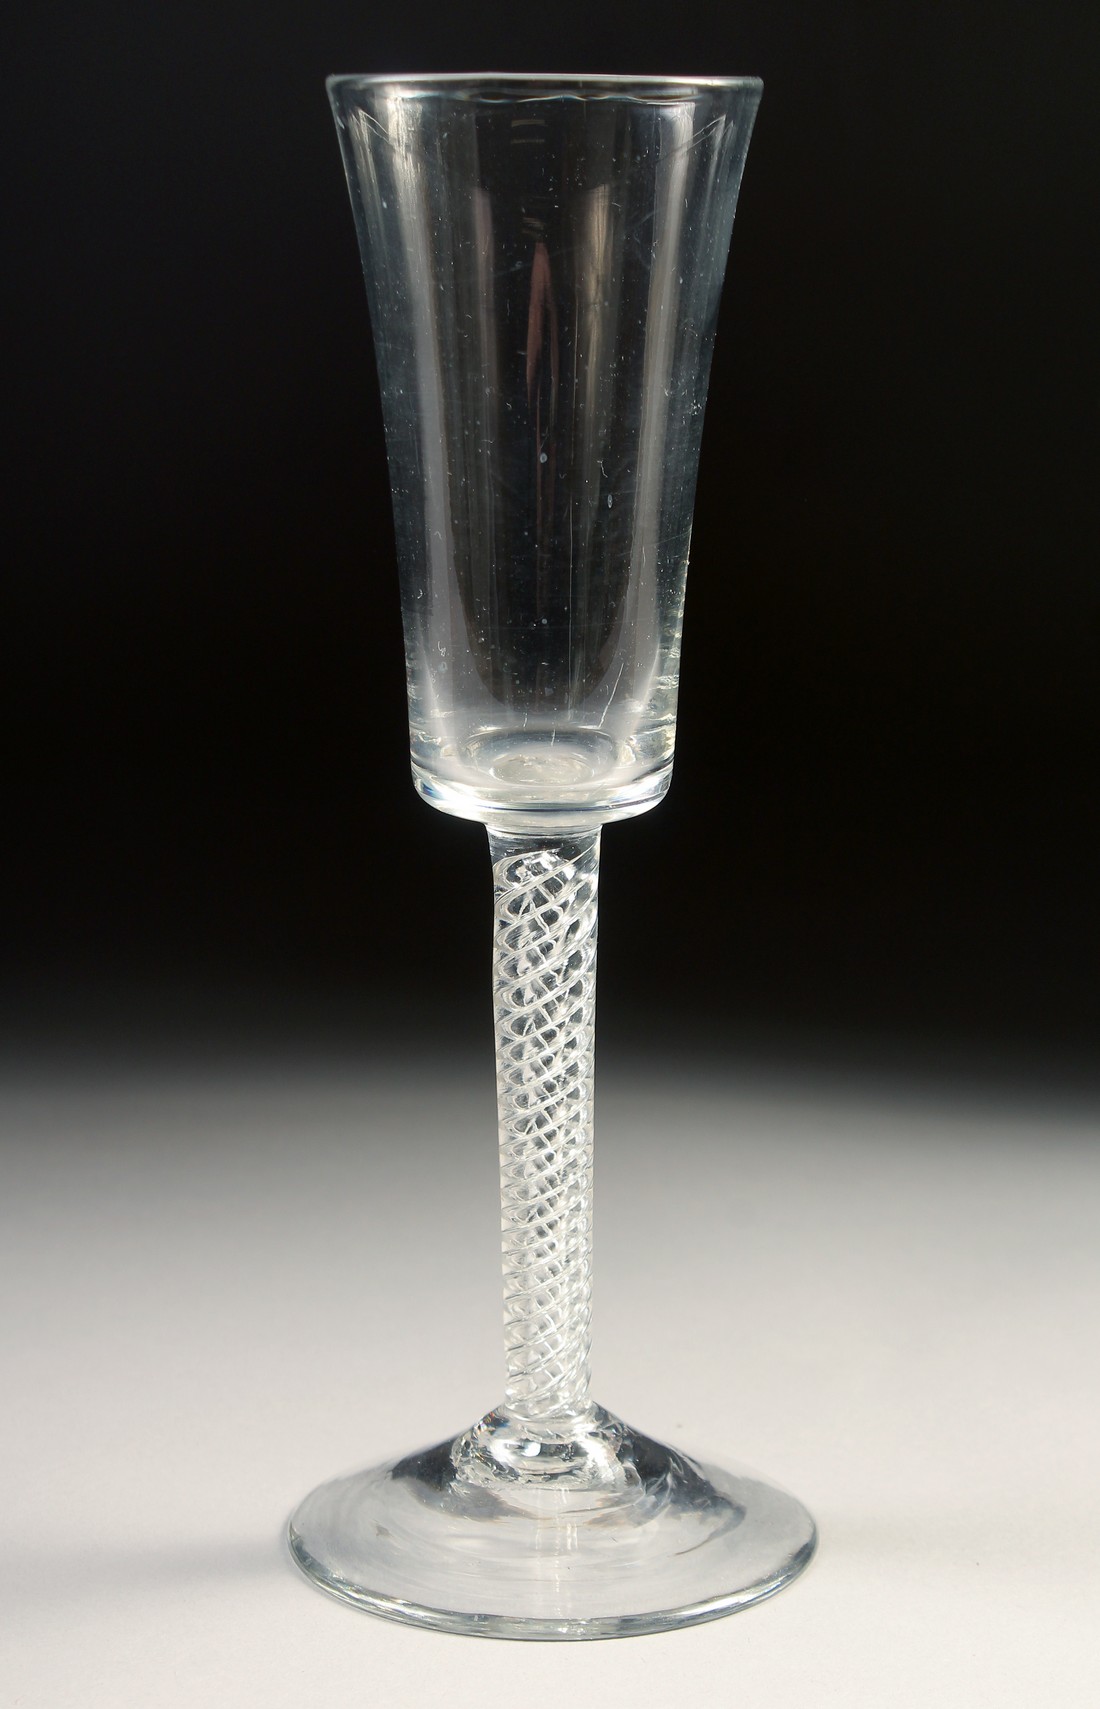 AN 18TH CENTURY TALL PLAIN ALE GLASS with air twist stem. 7.75ins high. - Image 2 of 4